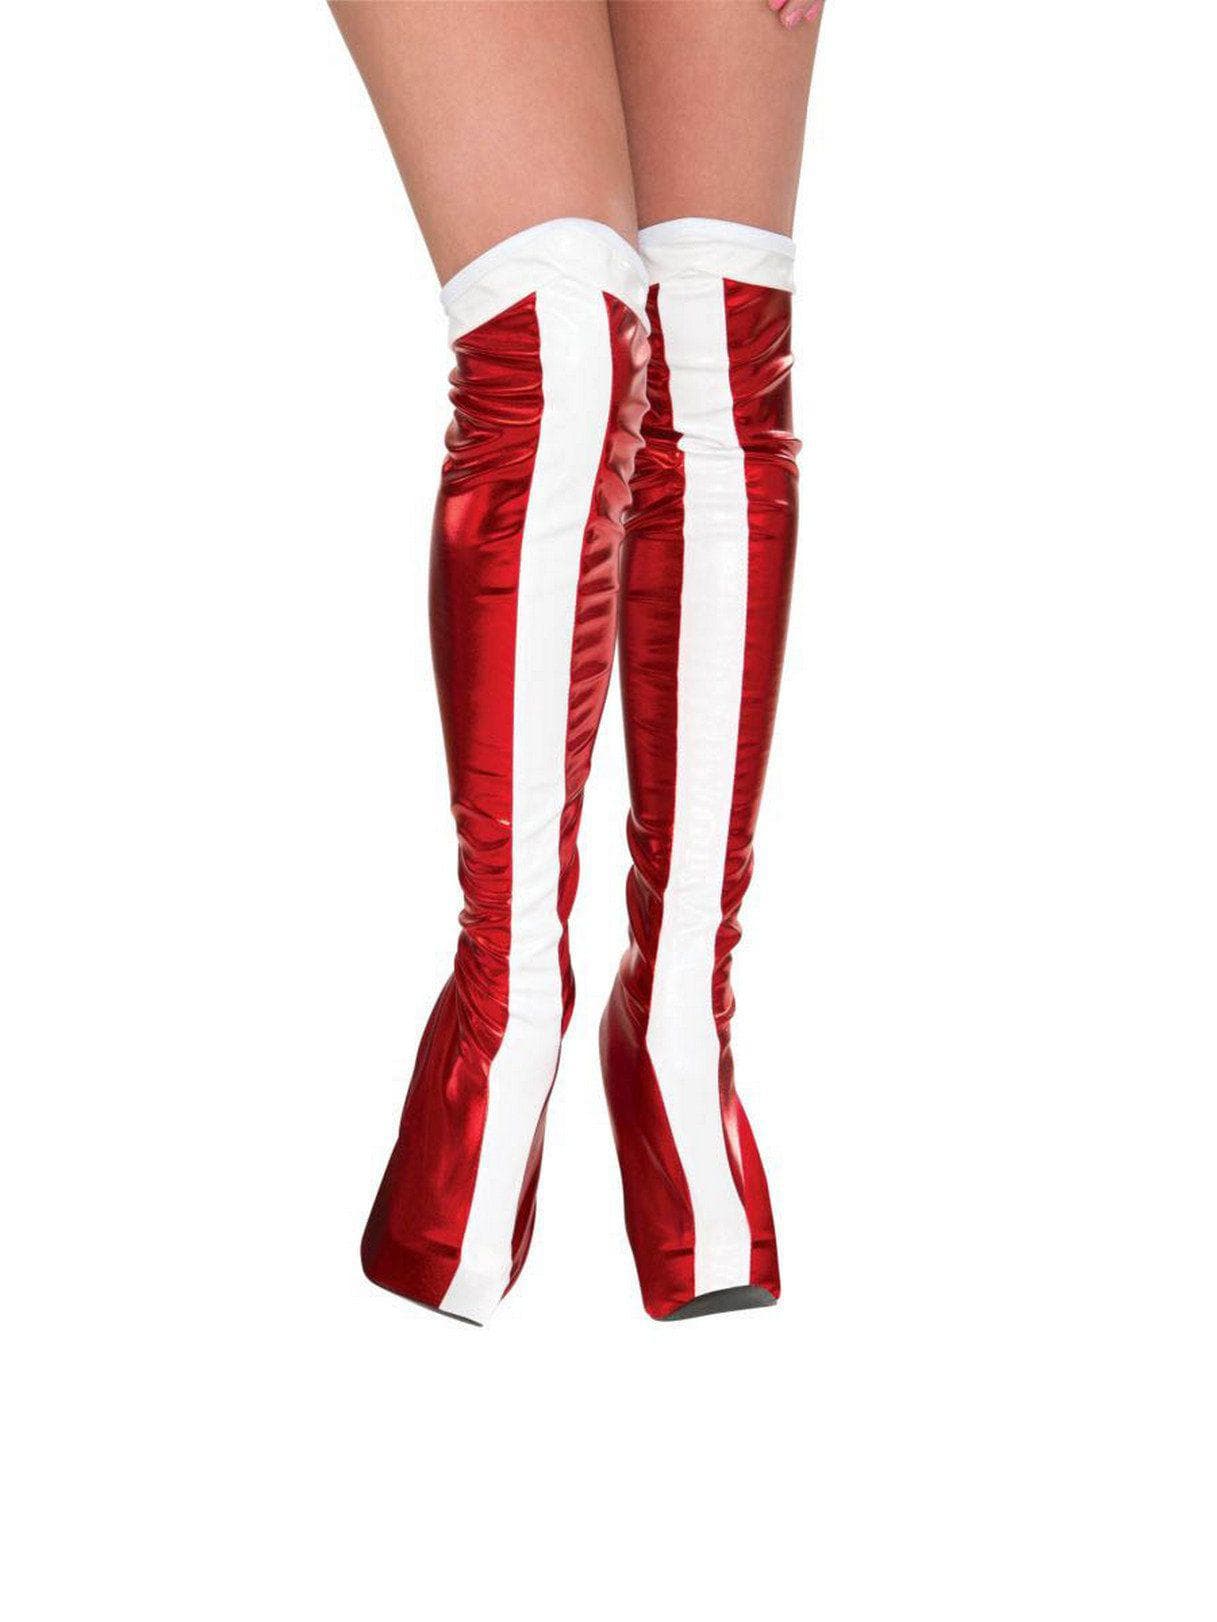 Adult Red Stripe Wonder Woman Boot Tops - costumes.com